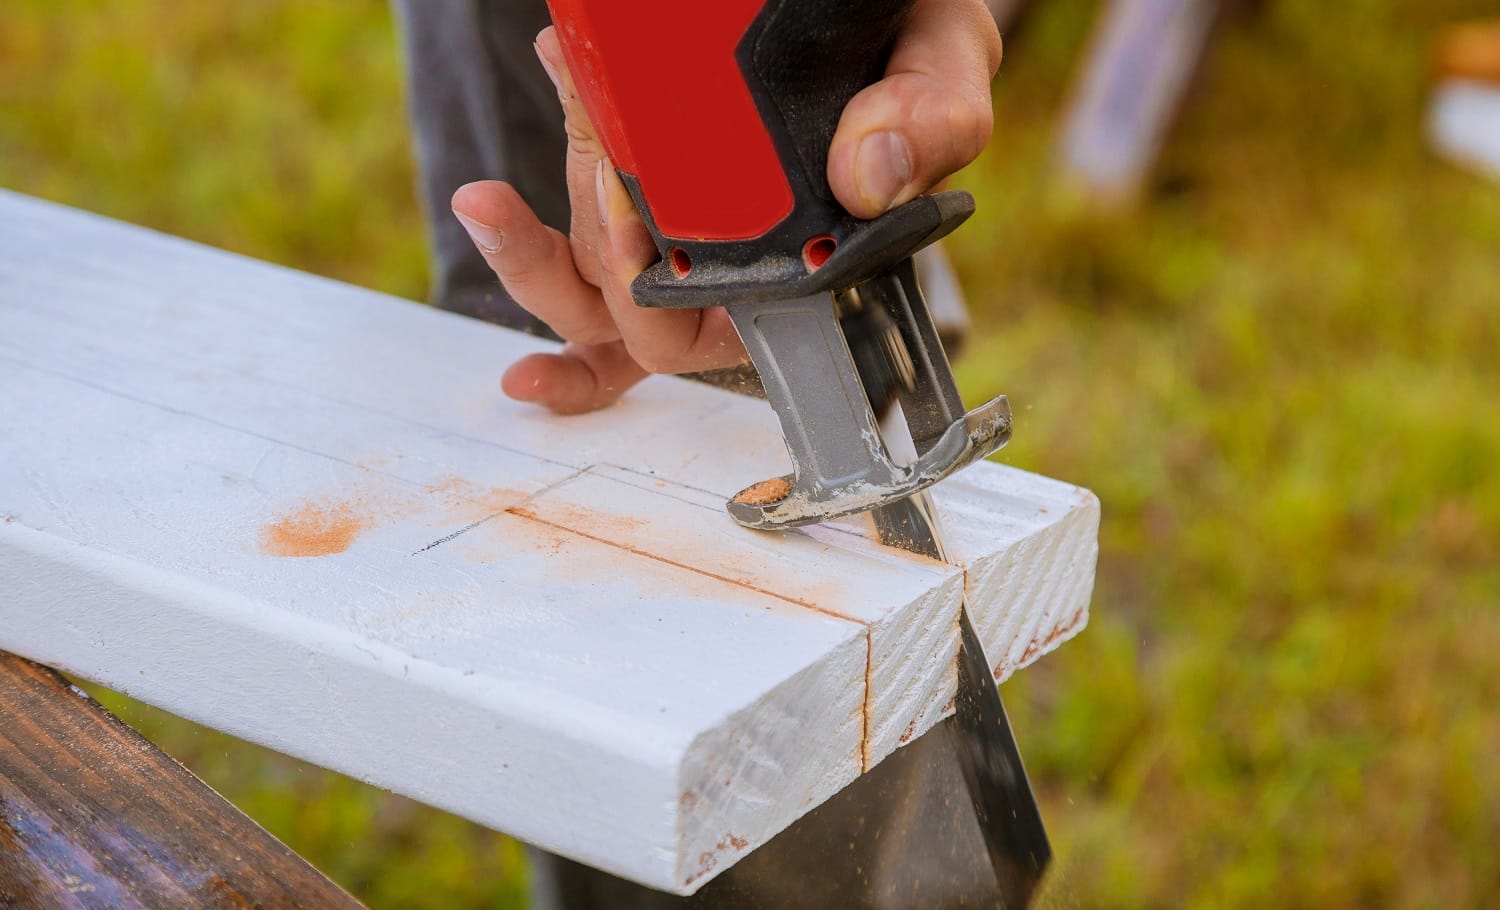 A man is cutting a board of wood with jigsaw detail of a cutting wooden board with saw dust.